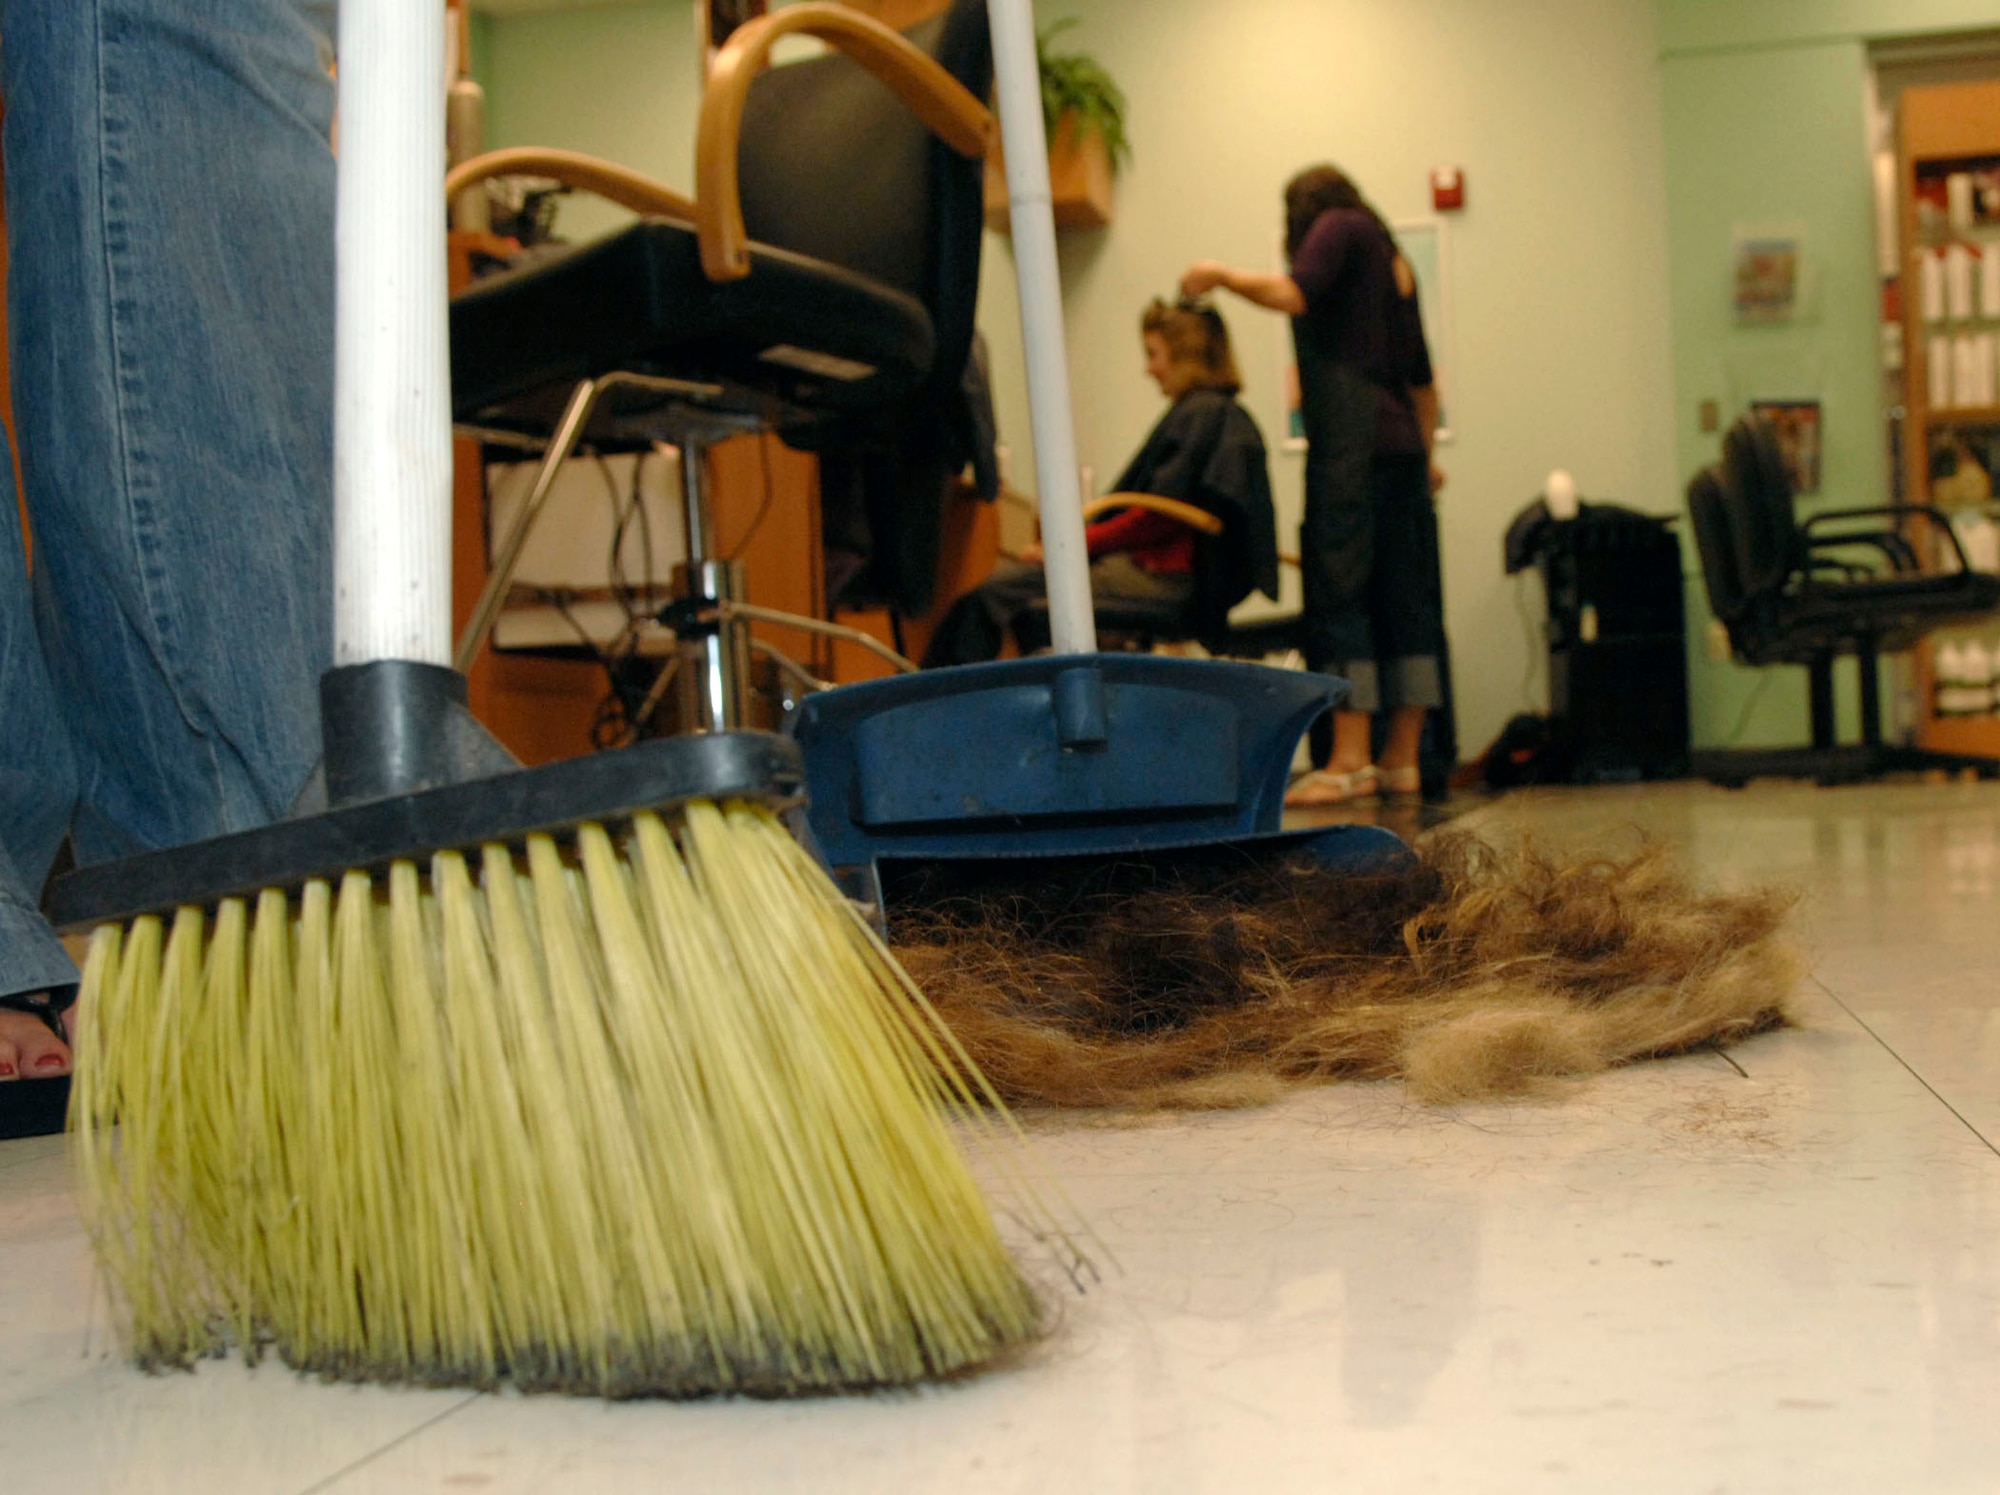 A stylist at the base exchange beauty salon collects hair clippings to be donated to an organization that makes booms to soak up oil to assist with the oil spill in the Gulf of Mexico.(Courtesy photo)
